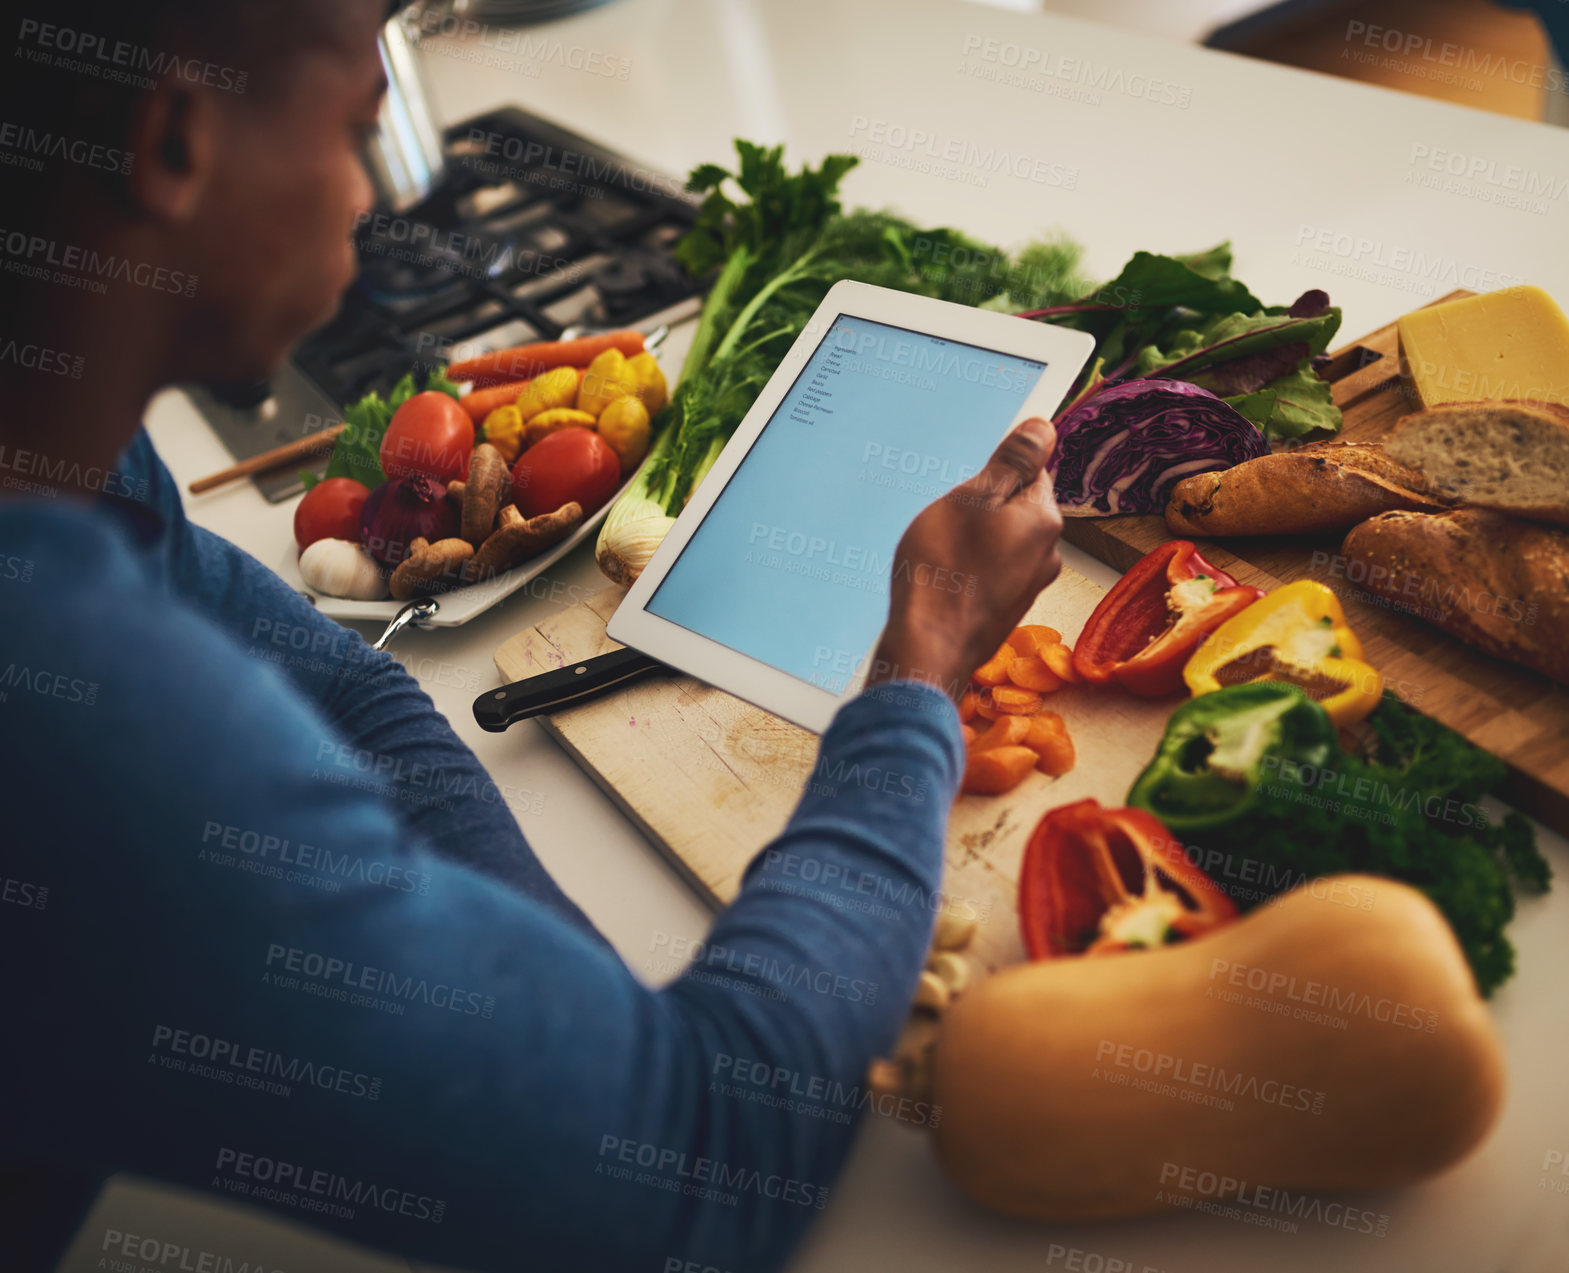 Buy stock photo Shot of a focused young man holding a digital tablet over a bunch of vegetables in the kitchen at home